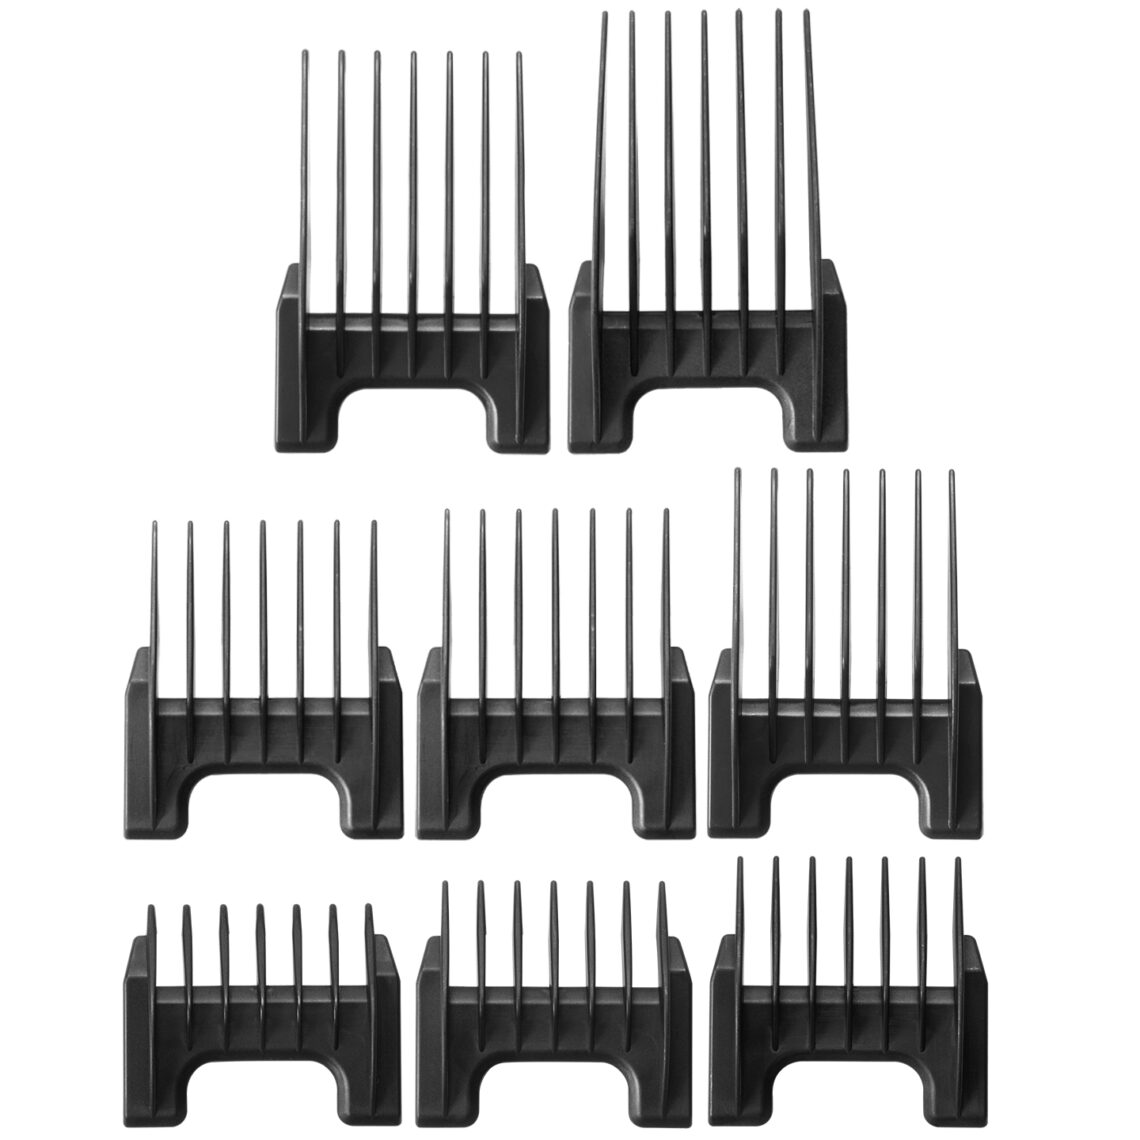 wahl cutting comb